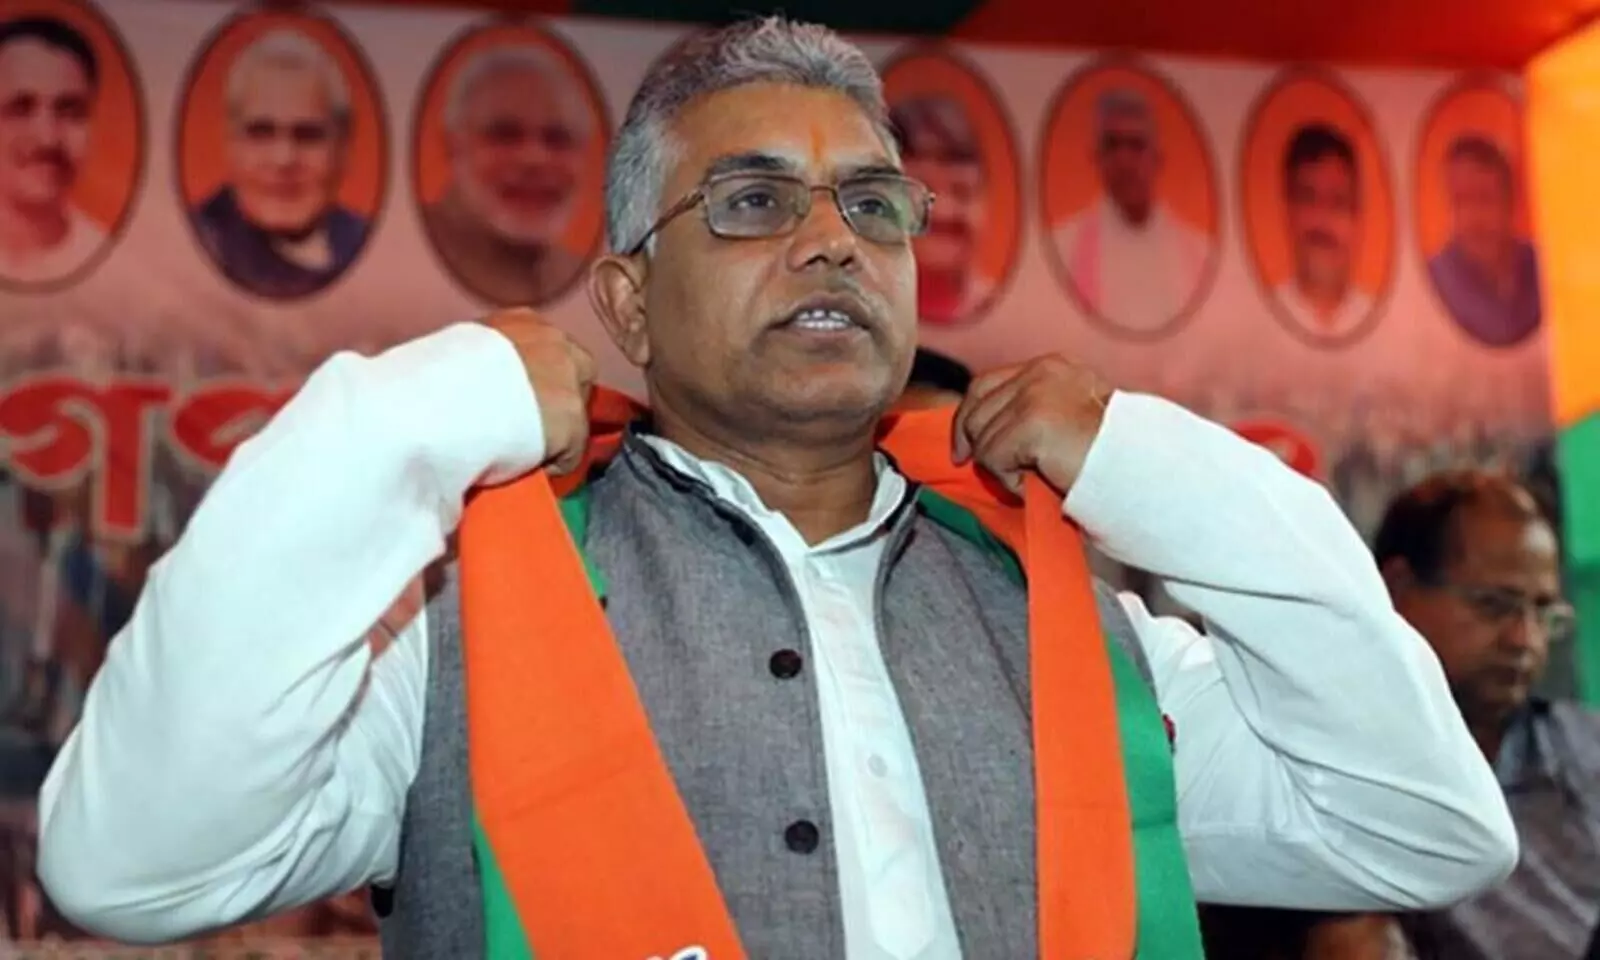 Outsiders played bigger role than Bengalis in states development, says BJPs Dilip Ghosh